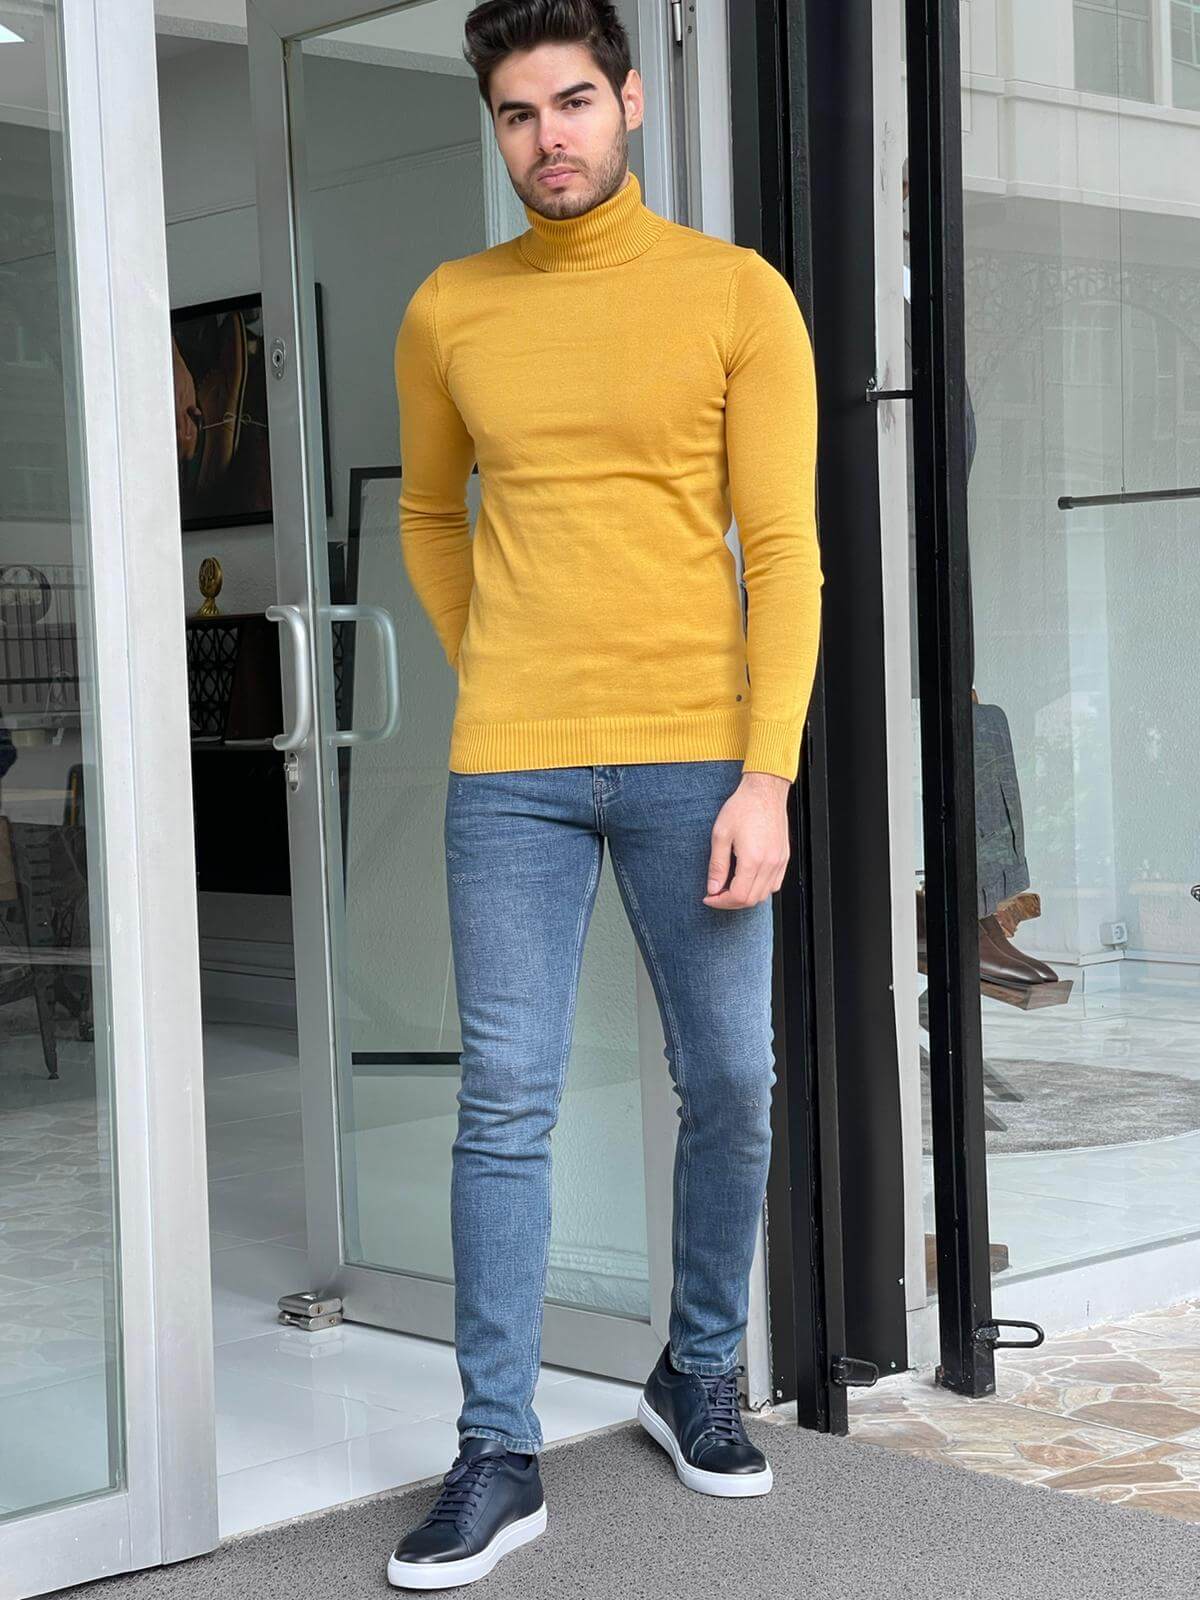 A stylish yellow turtleneck sweater worn by a model, showcasing its vibrant color and modern design."